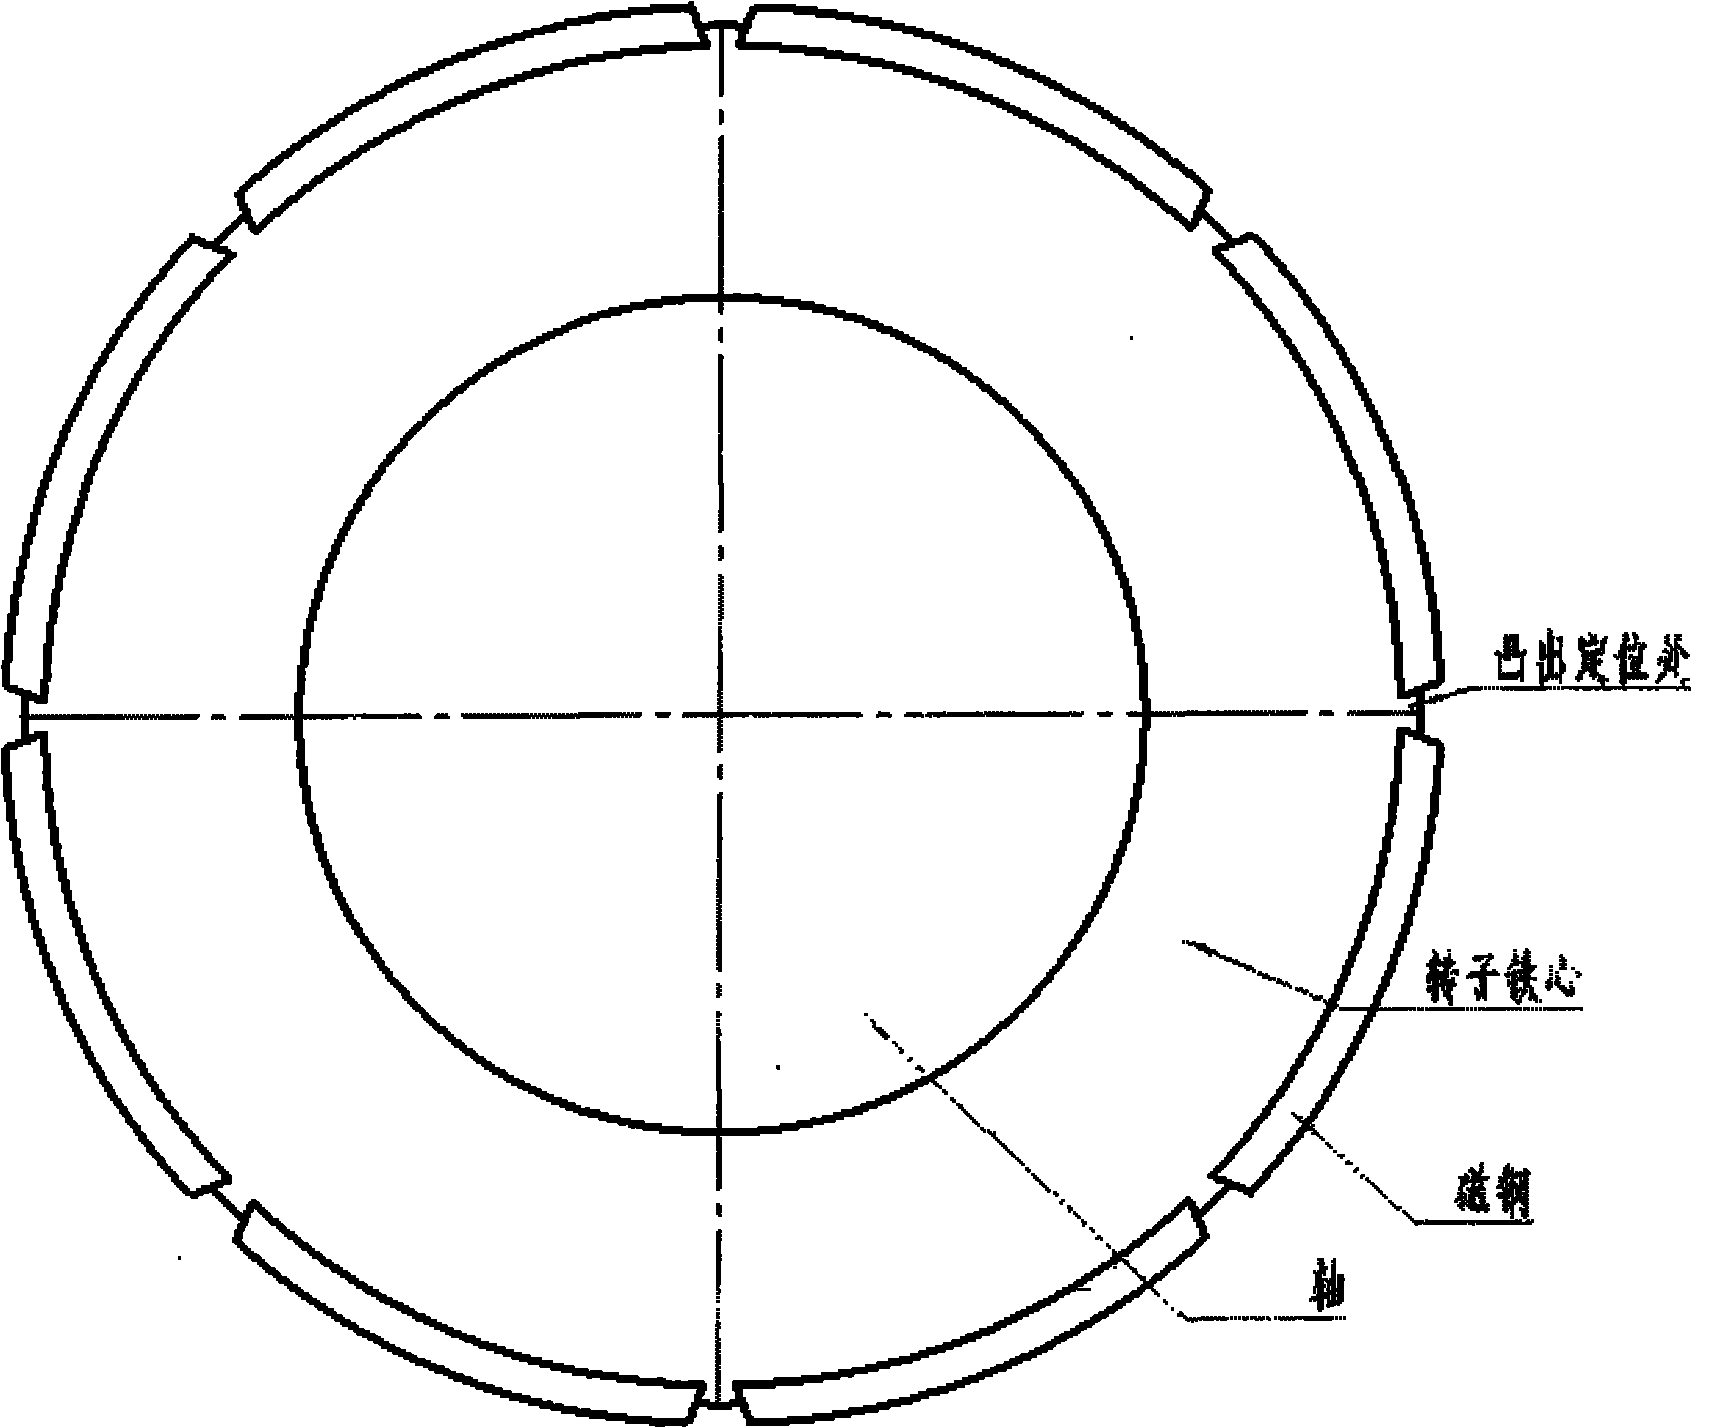 Semi-embedded structure of rotor of permanent magnet synchronous motor